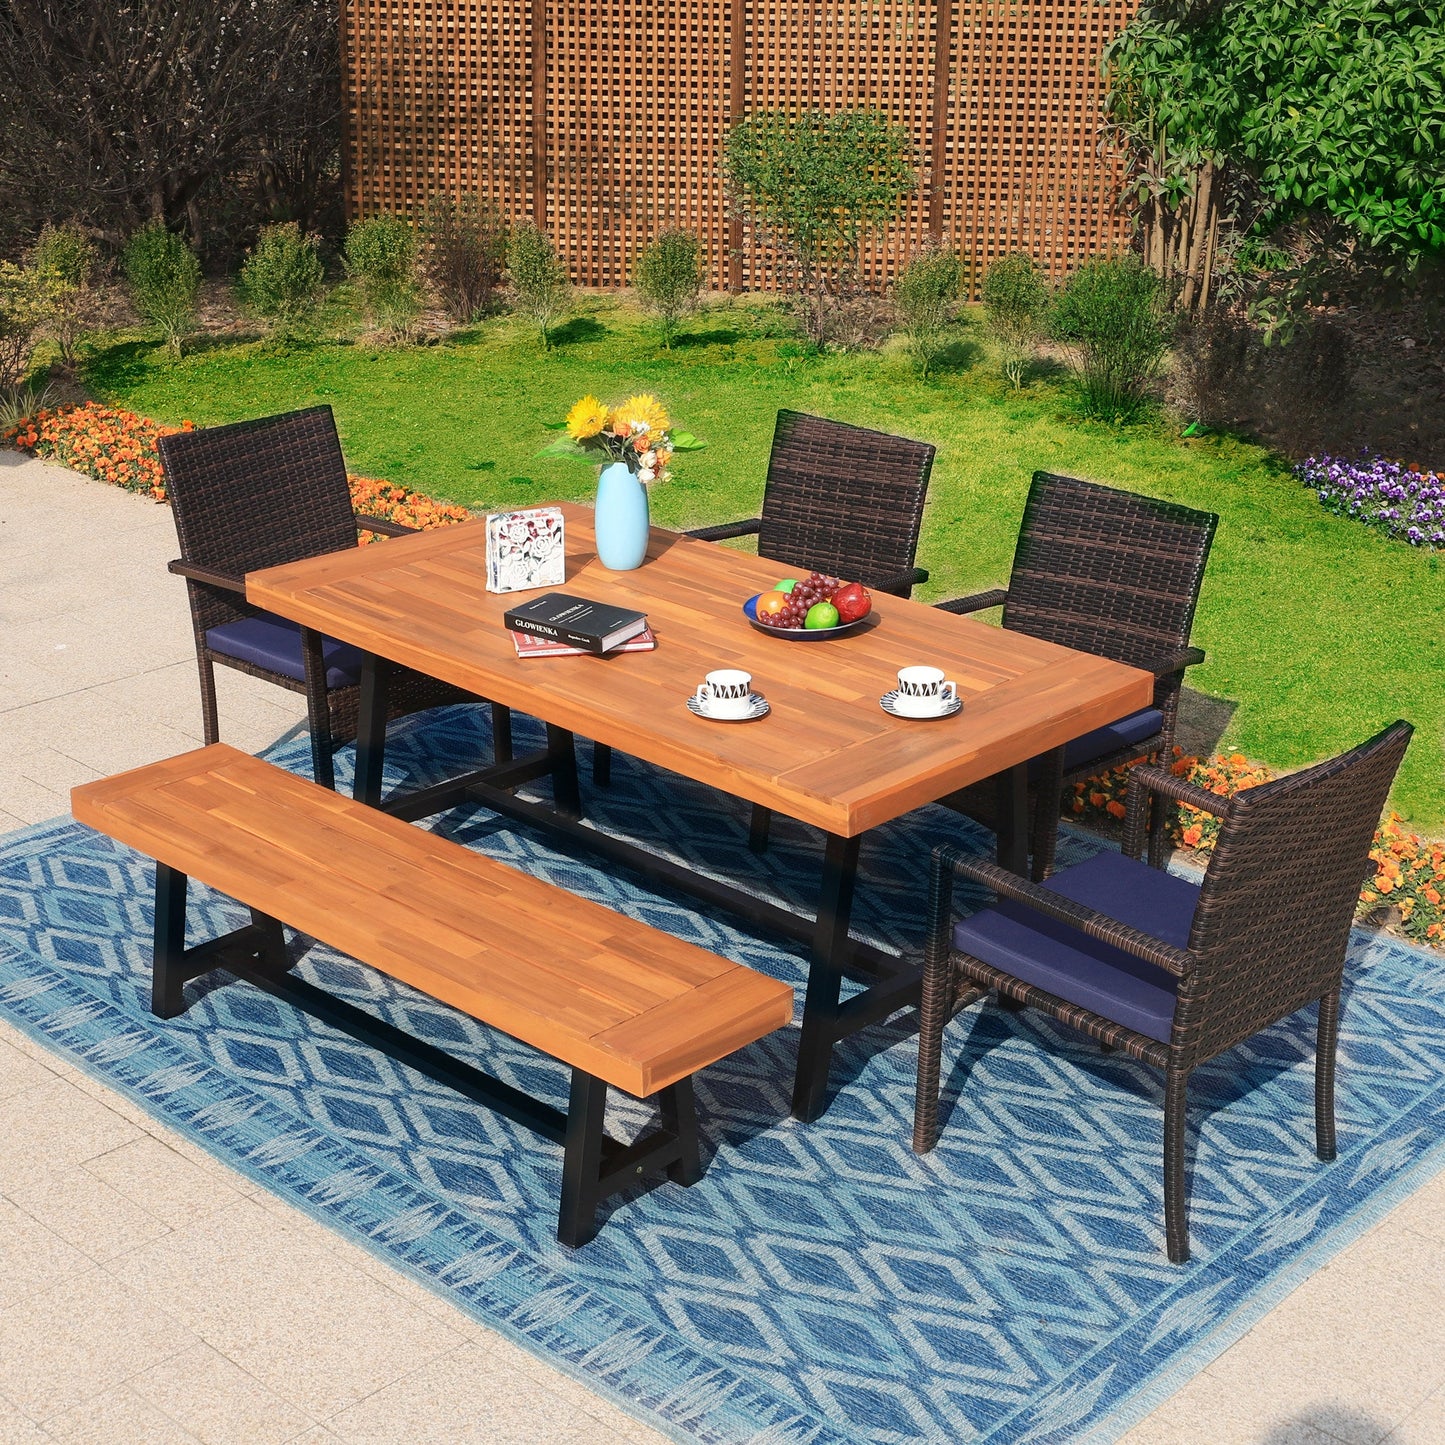 Sophia&William 6-Piece Outdoor Patio Dining Set Wicker Rattan Chairs and Bench Table Set